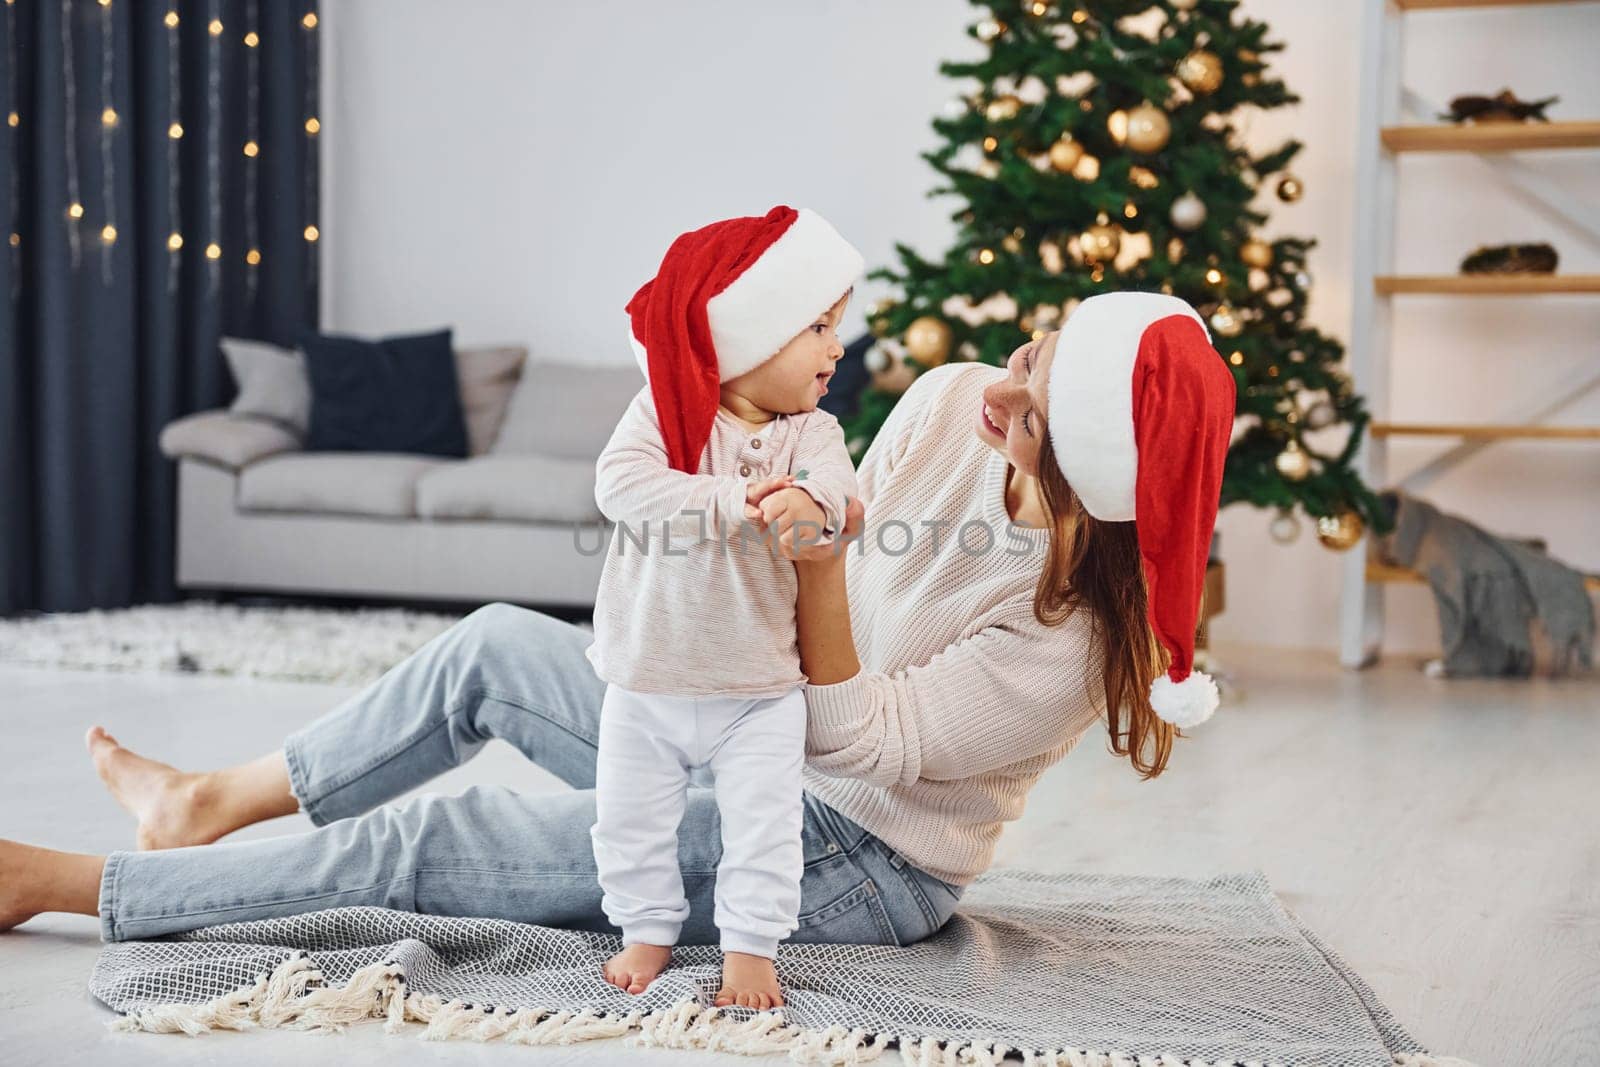 Celebrating Christmas. Mother with her little daughter is indoors at home together.